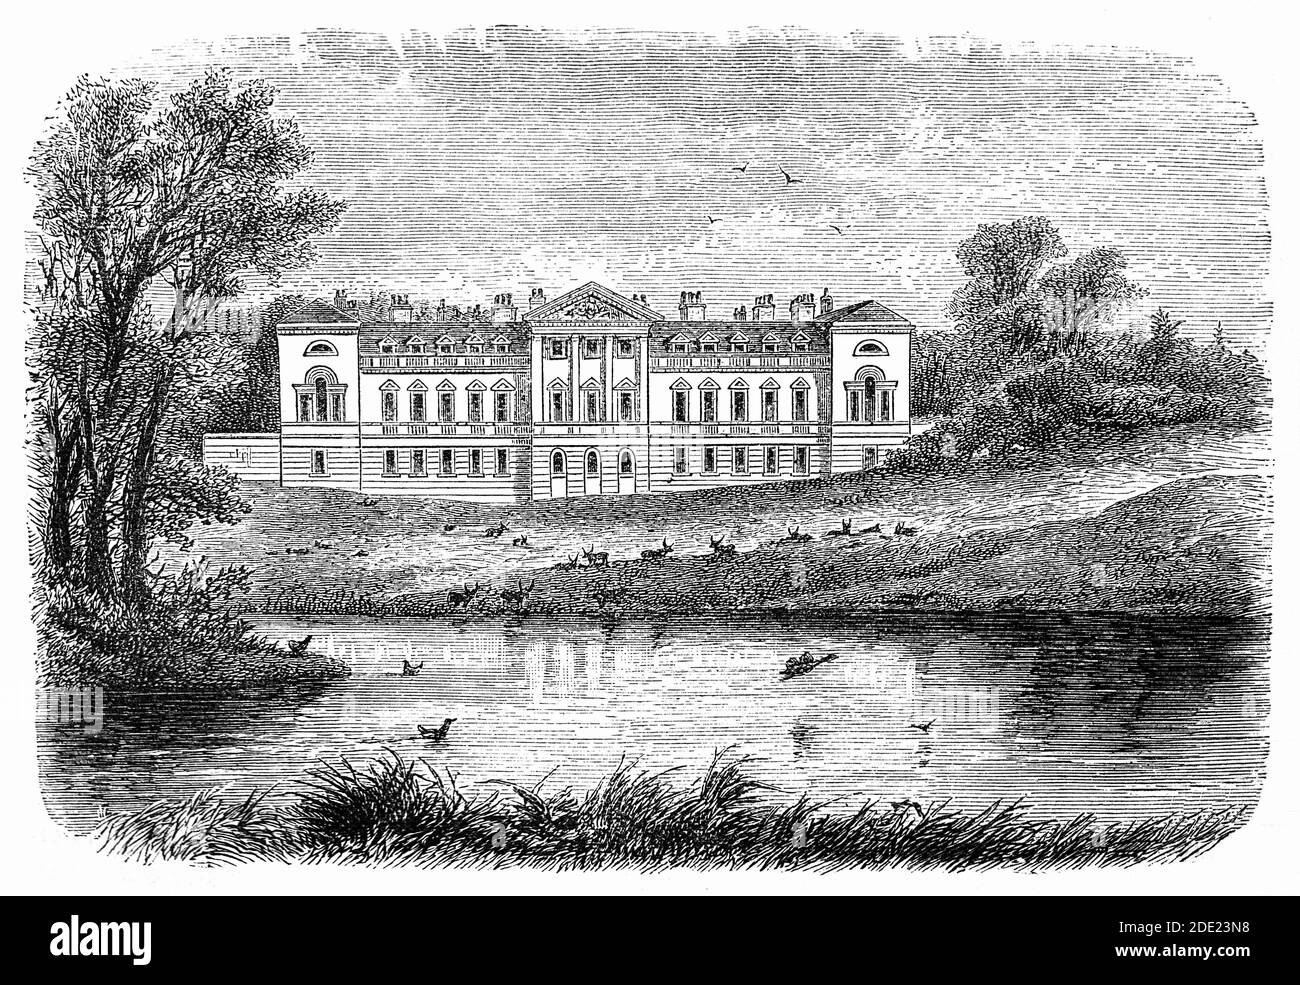 A 19th Century sketch of Woburn Abbey, a country house near the village of Woburn, Bedfordshire, England. Originally a Cistercian abbey built in 1145. It was taken from its monastic residents by Henry VIII and given to John Russell, 1st Earl of Bedford, in 1547, it became the seat of the Russell family and the Dukes of Bedford, who demolished the original abbey building and built their house on the monastic site, although the name Abbey was retained. Stock Photo